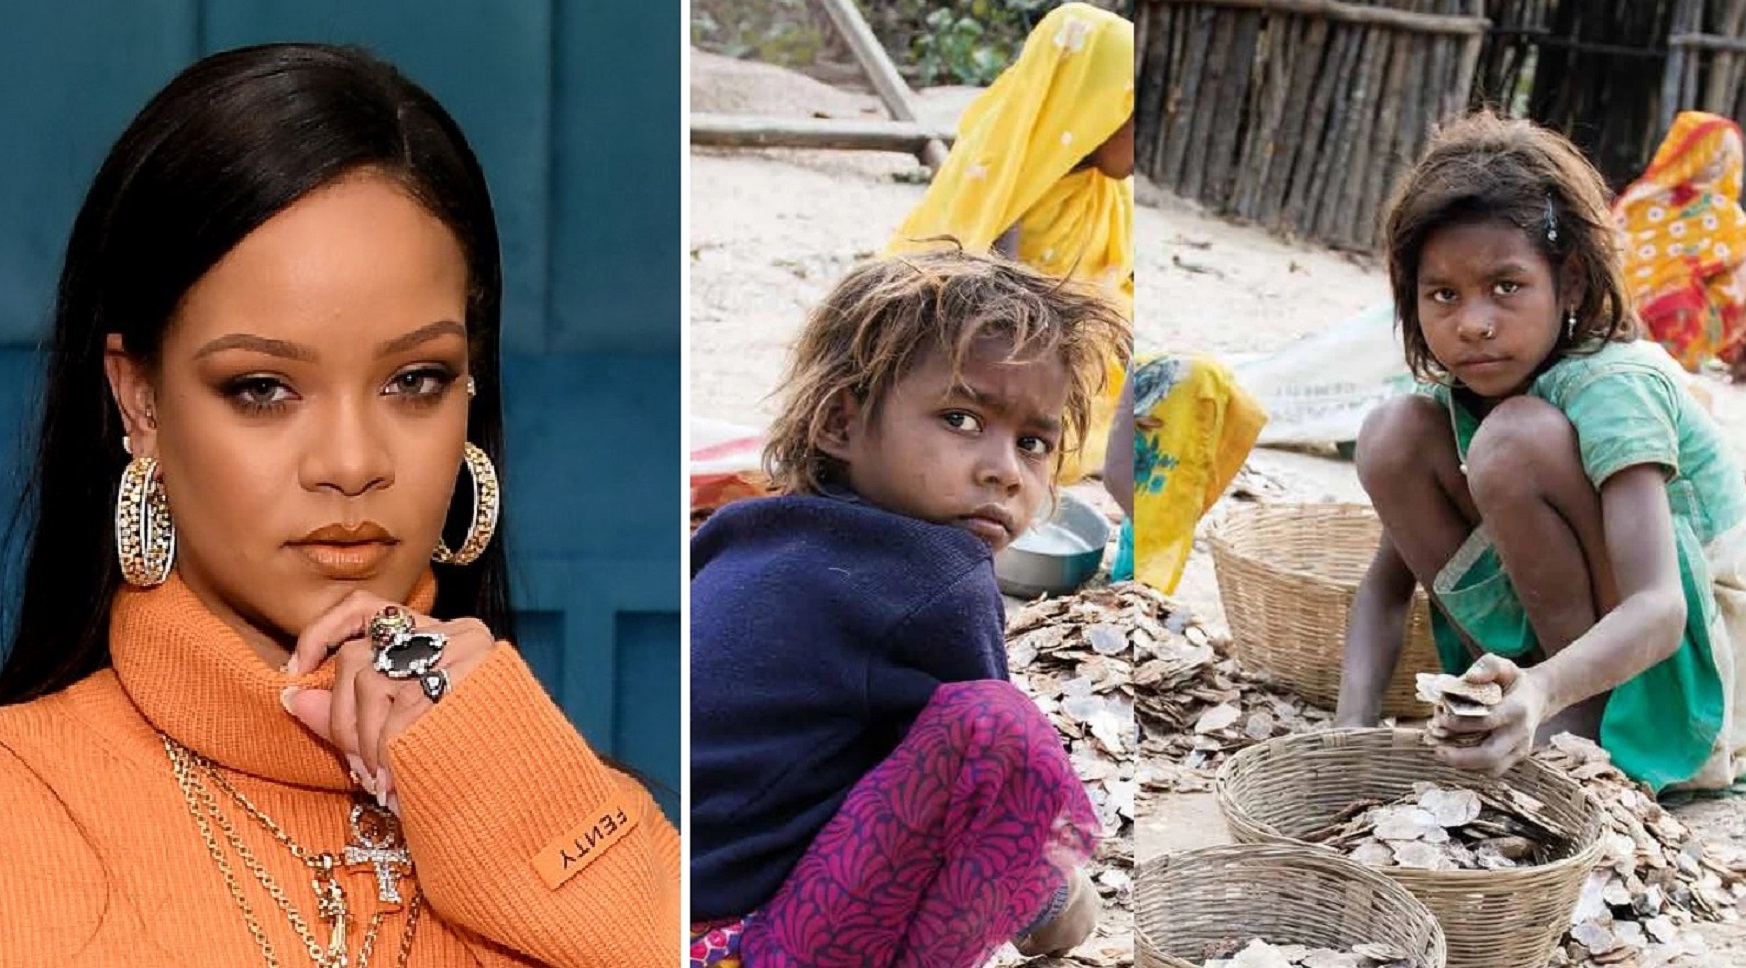 Exclusive: Rihanna and ‘Fenty Beauty’ Face Child Labour Allegations, Complaint Filed